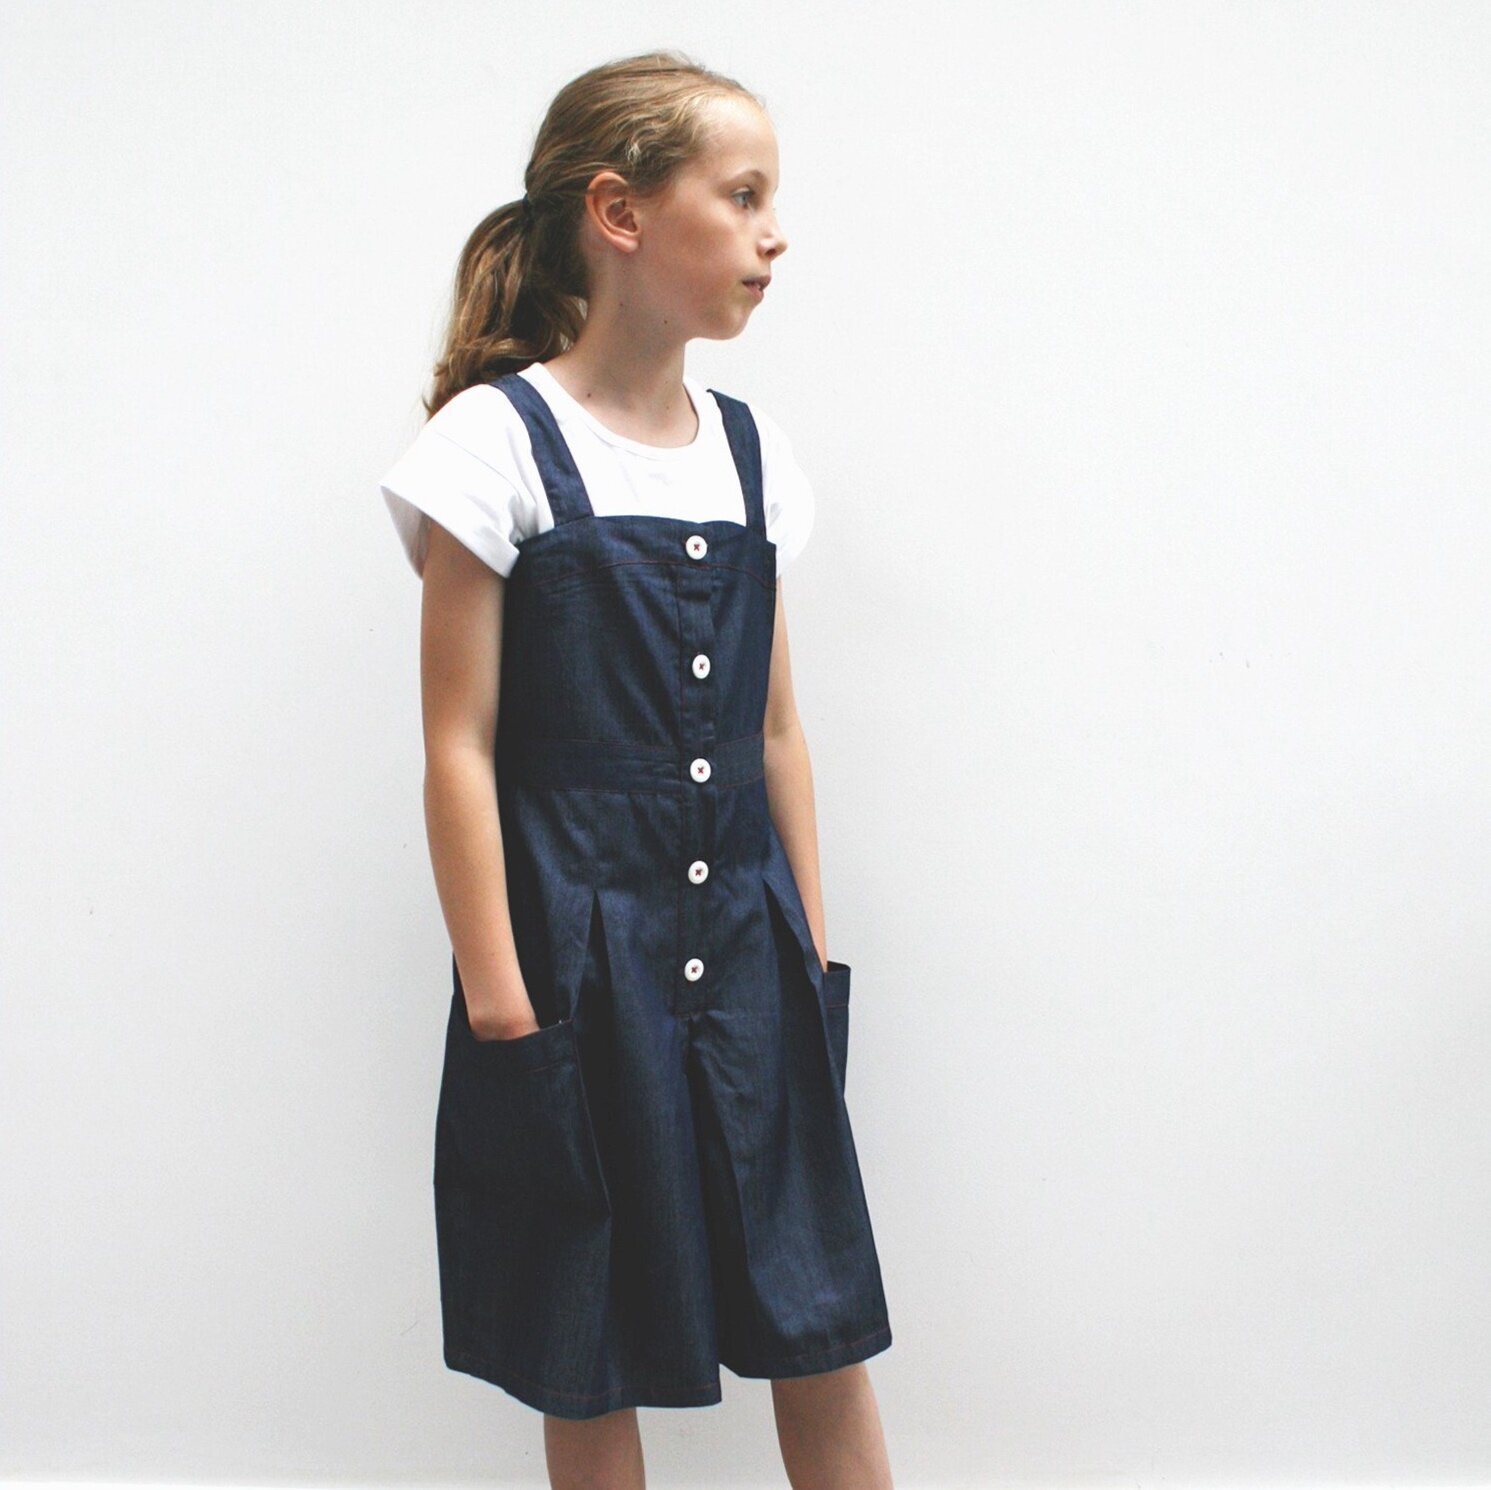  Isabel Wong Bespoke Service Client Portfolio - childrenswear. Pattern cutting, pattern making and sampling services. Brand Well Grounded. Denim culotte jumpsuit 